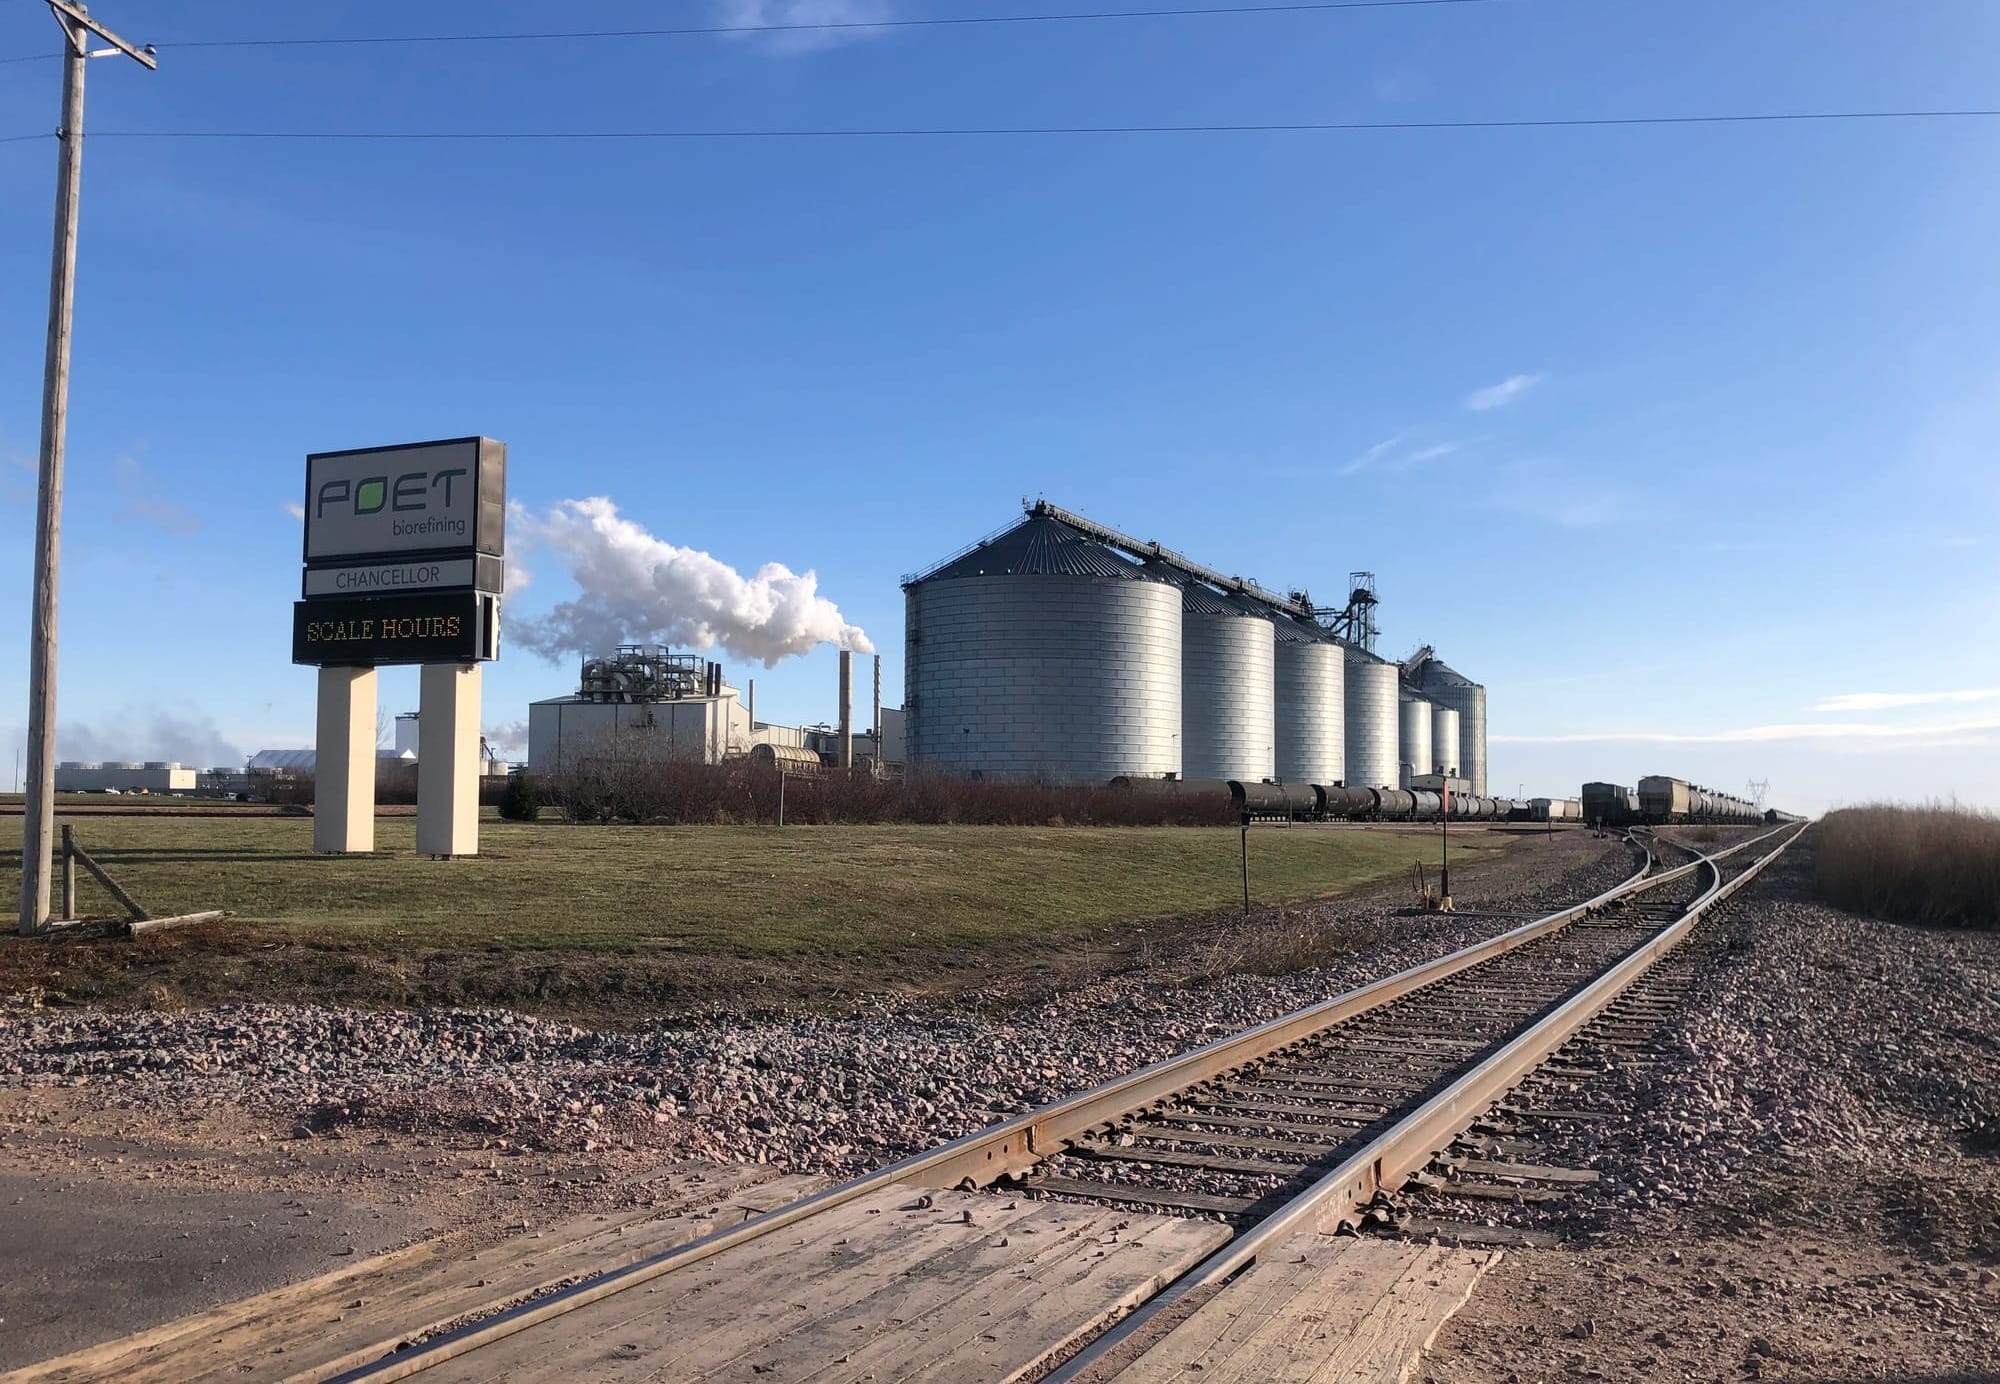 Poet biofuels ethanol plant sits next to a train track in South Dakota..